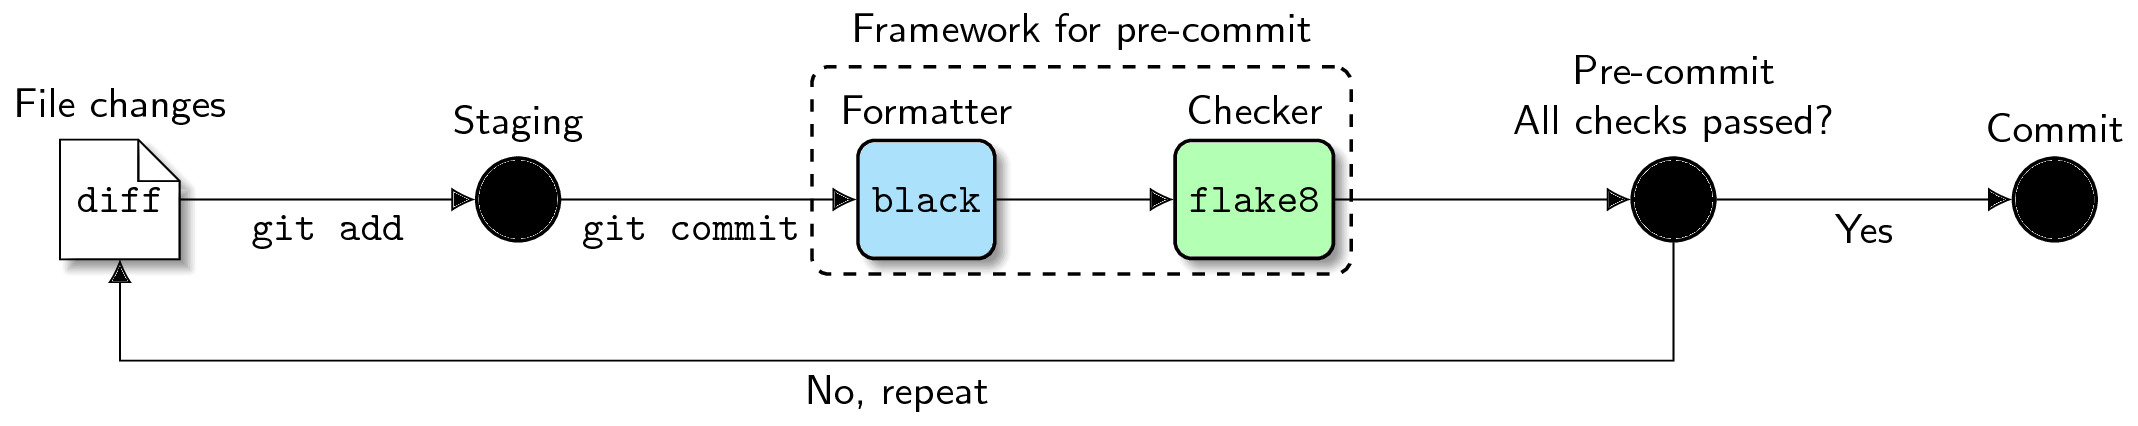 Basic `pre-commit` workflow (source: [Automate Python workflow using pre-commits: black and flake8](https://ljvmiranda921.github.io/notebook/2018/06/21/precommits-using-black-and-flake8/))